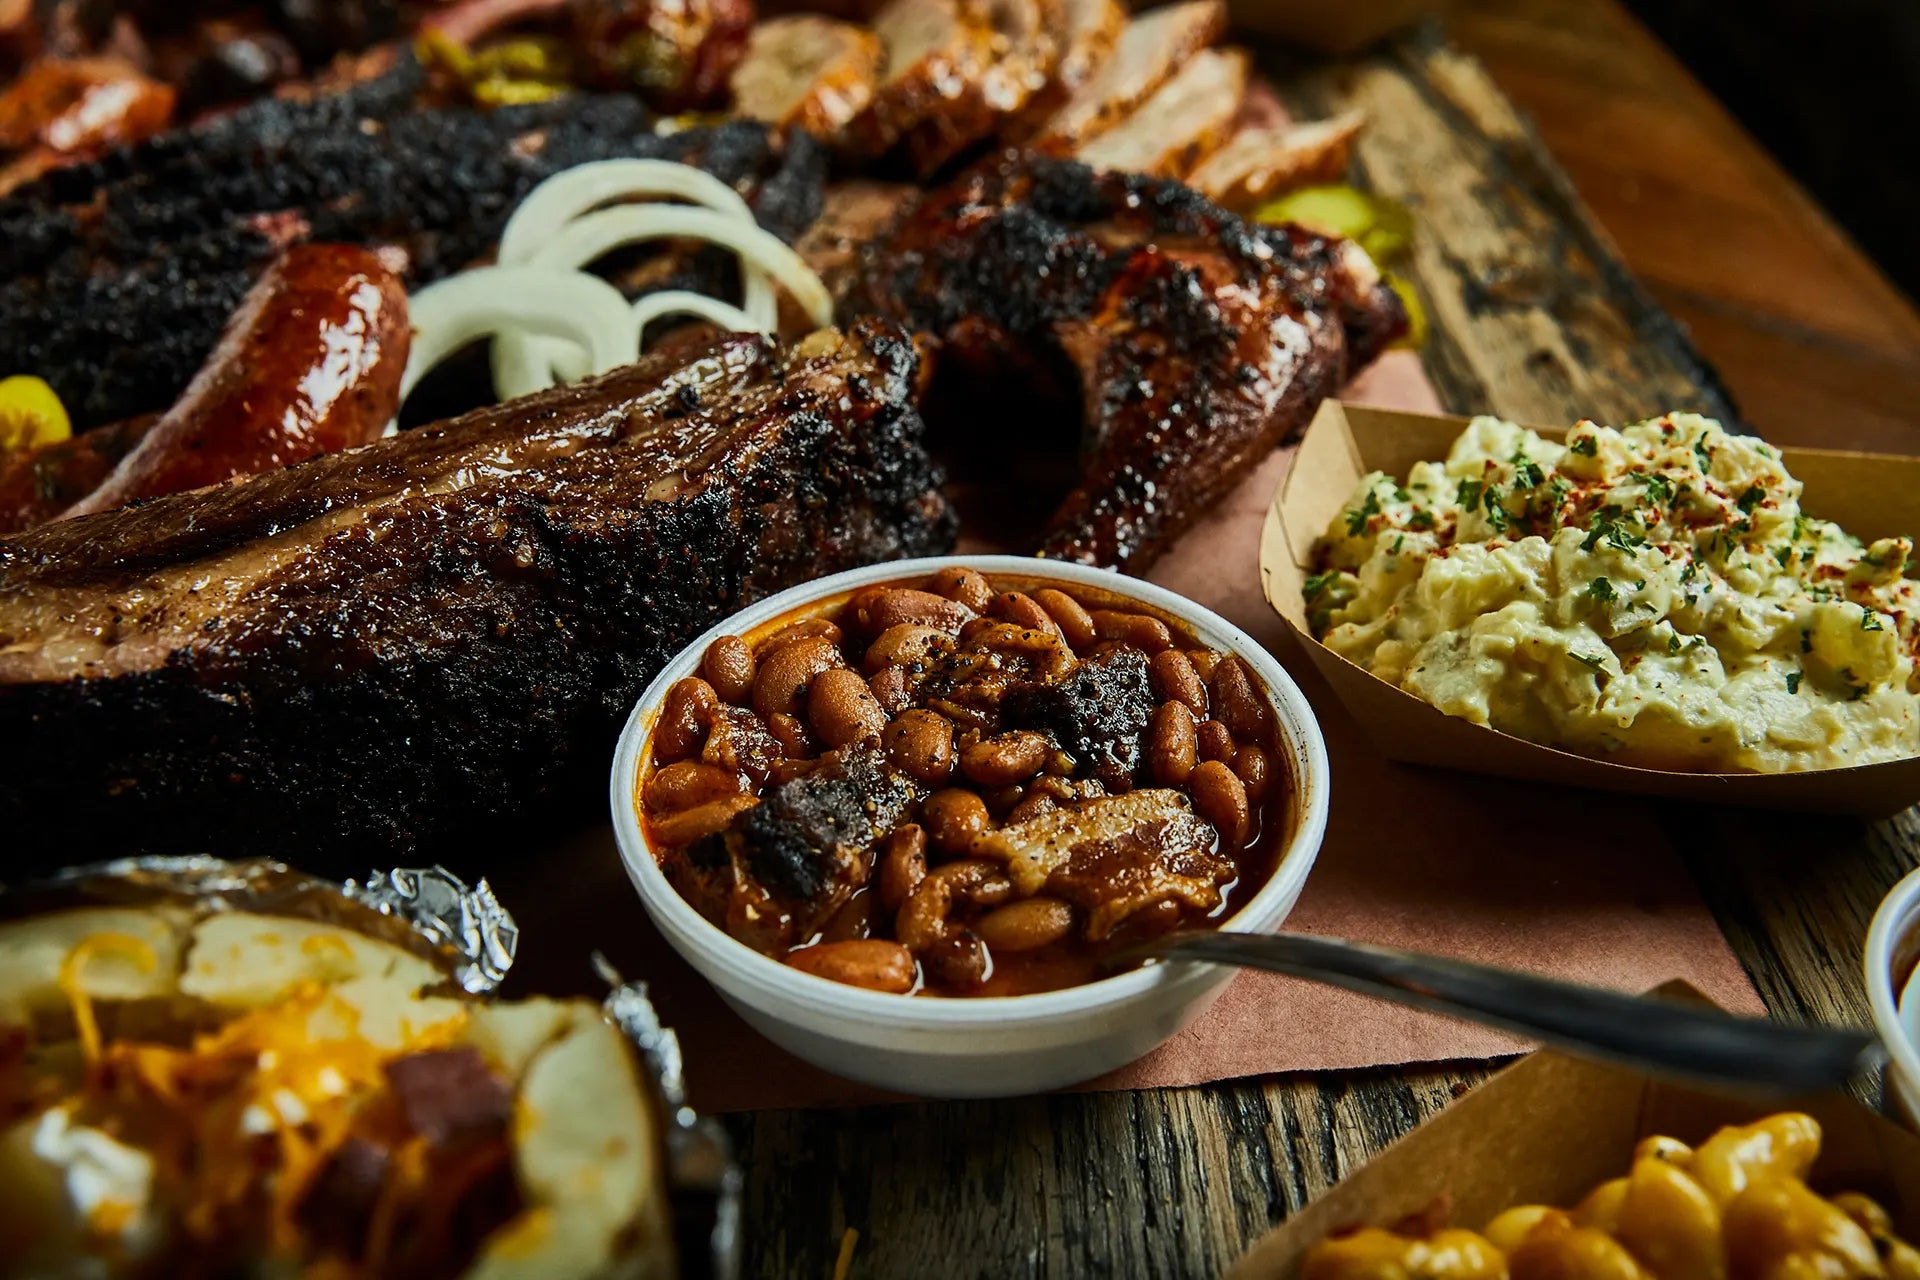 Why is the barbecue business in Texas so hot-blooded? 4 notable family feuds